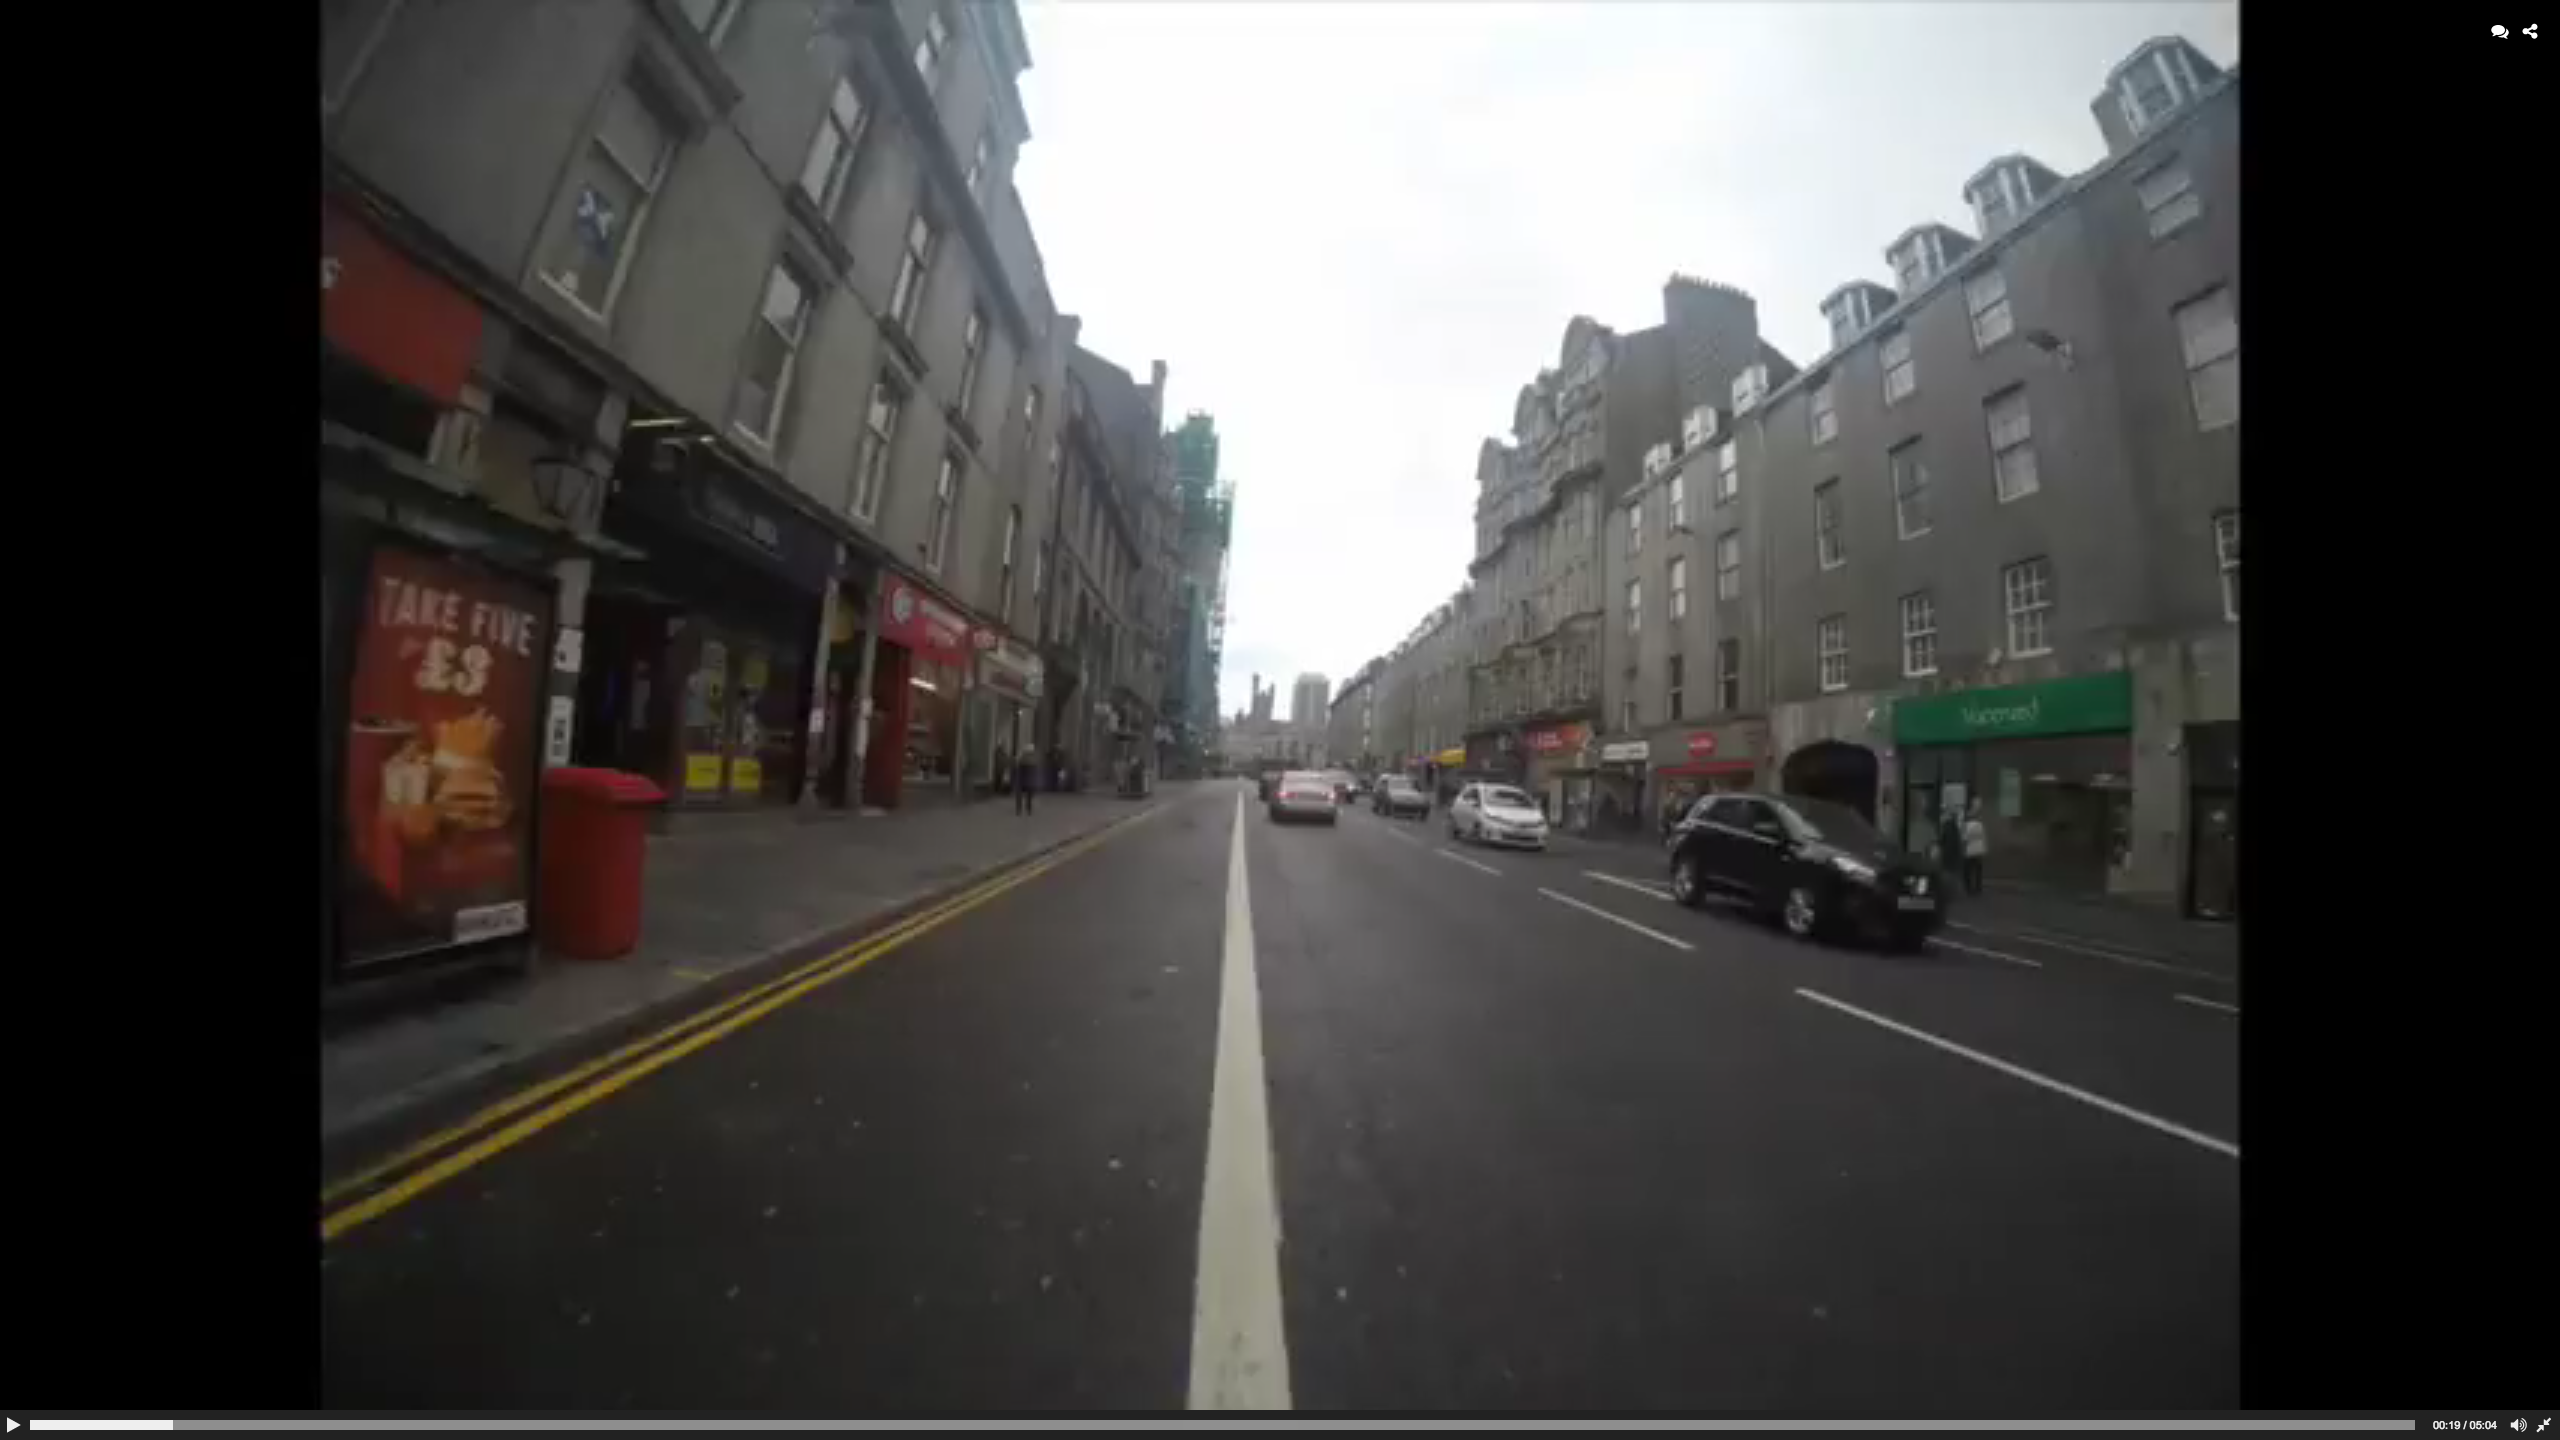 TImelapse of the Aberdeen to Peterhead  bus journey